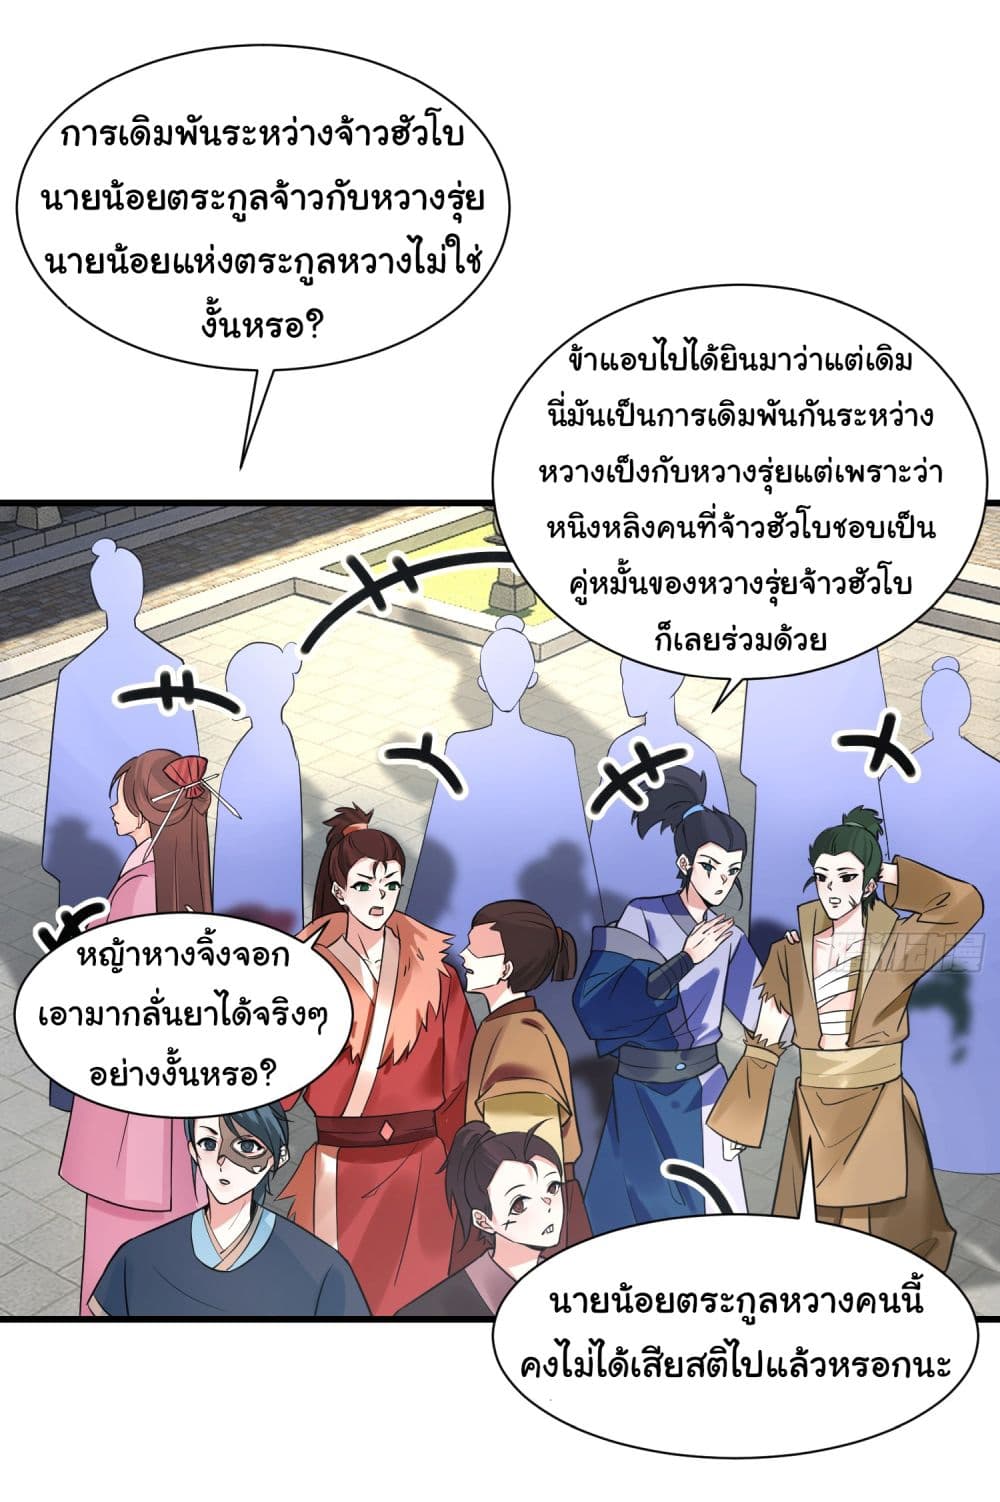 Rebirth of an Immortal Cultivator from 10,000 years ago ตอนที่ 11 (8)